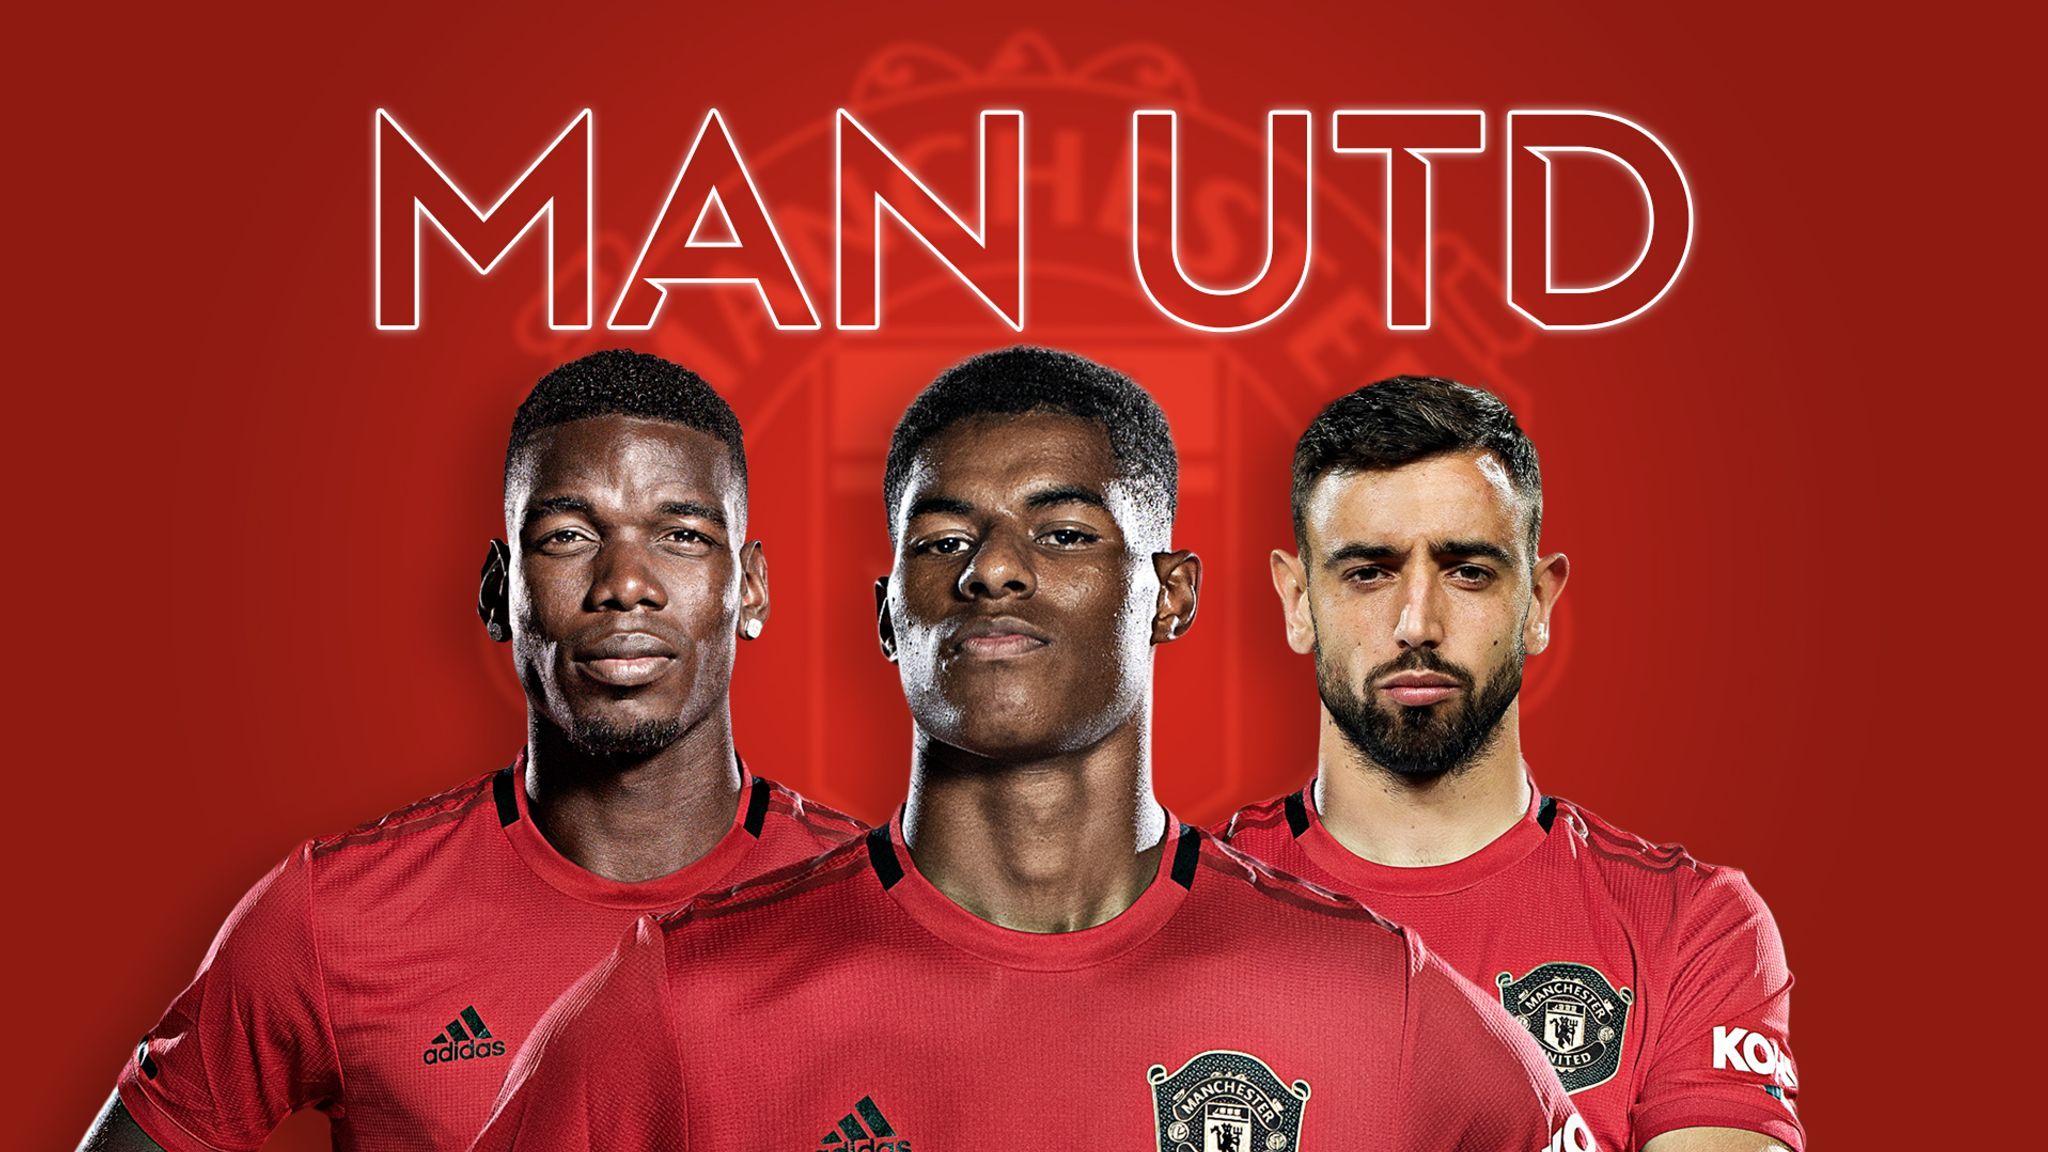 Manchester United 2021 Wallpaper Free Manchester United 2021 Background